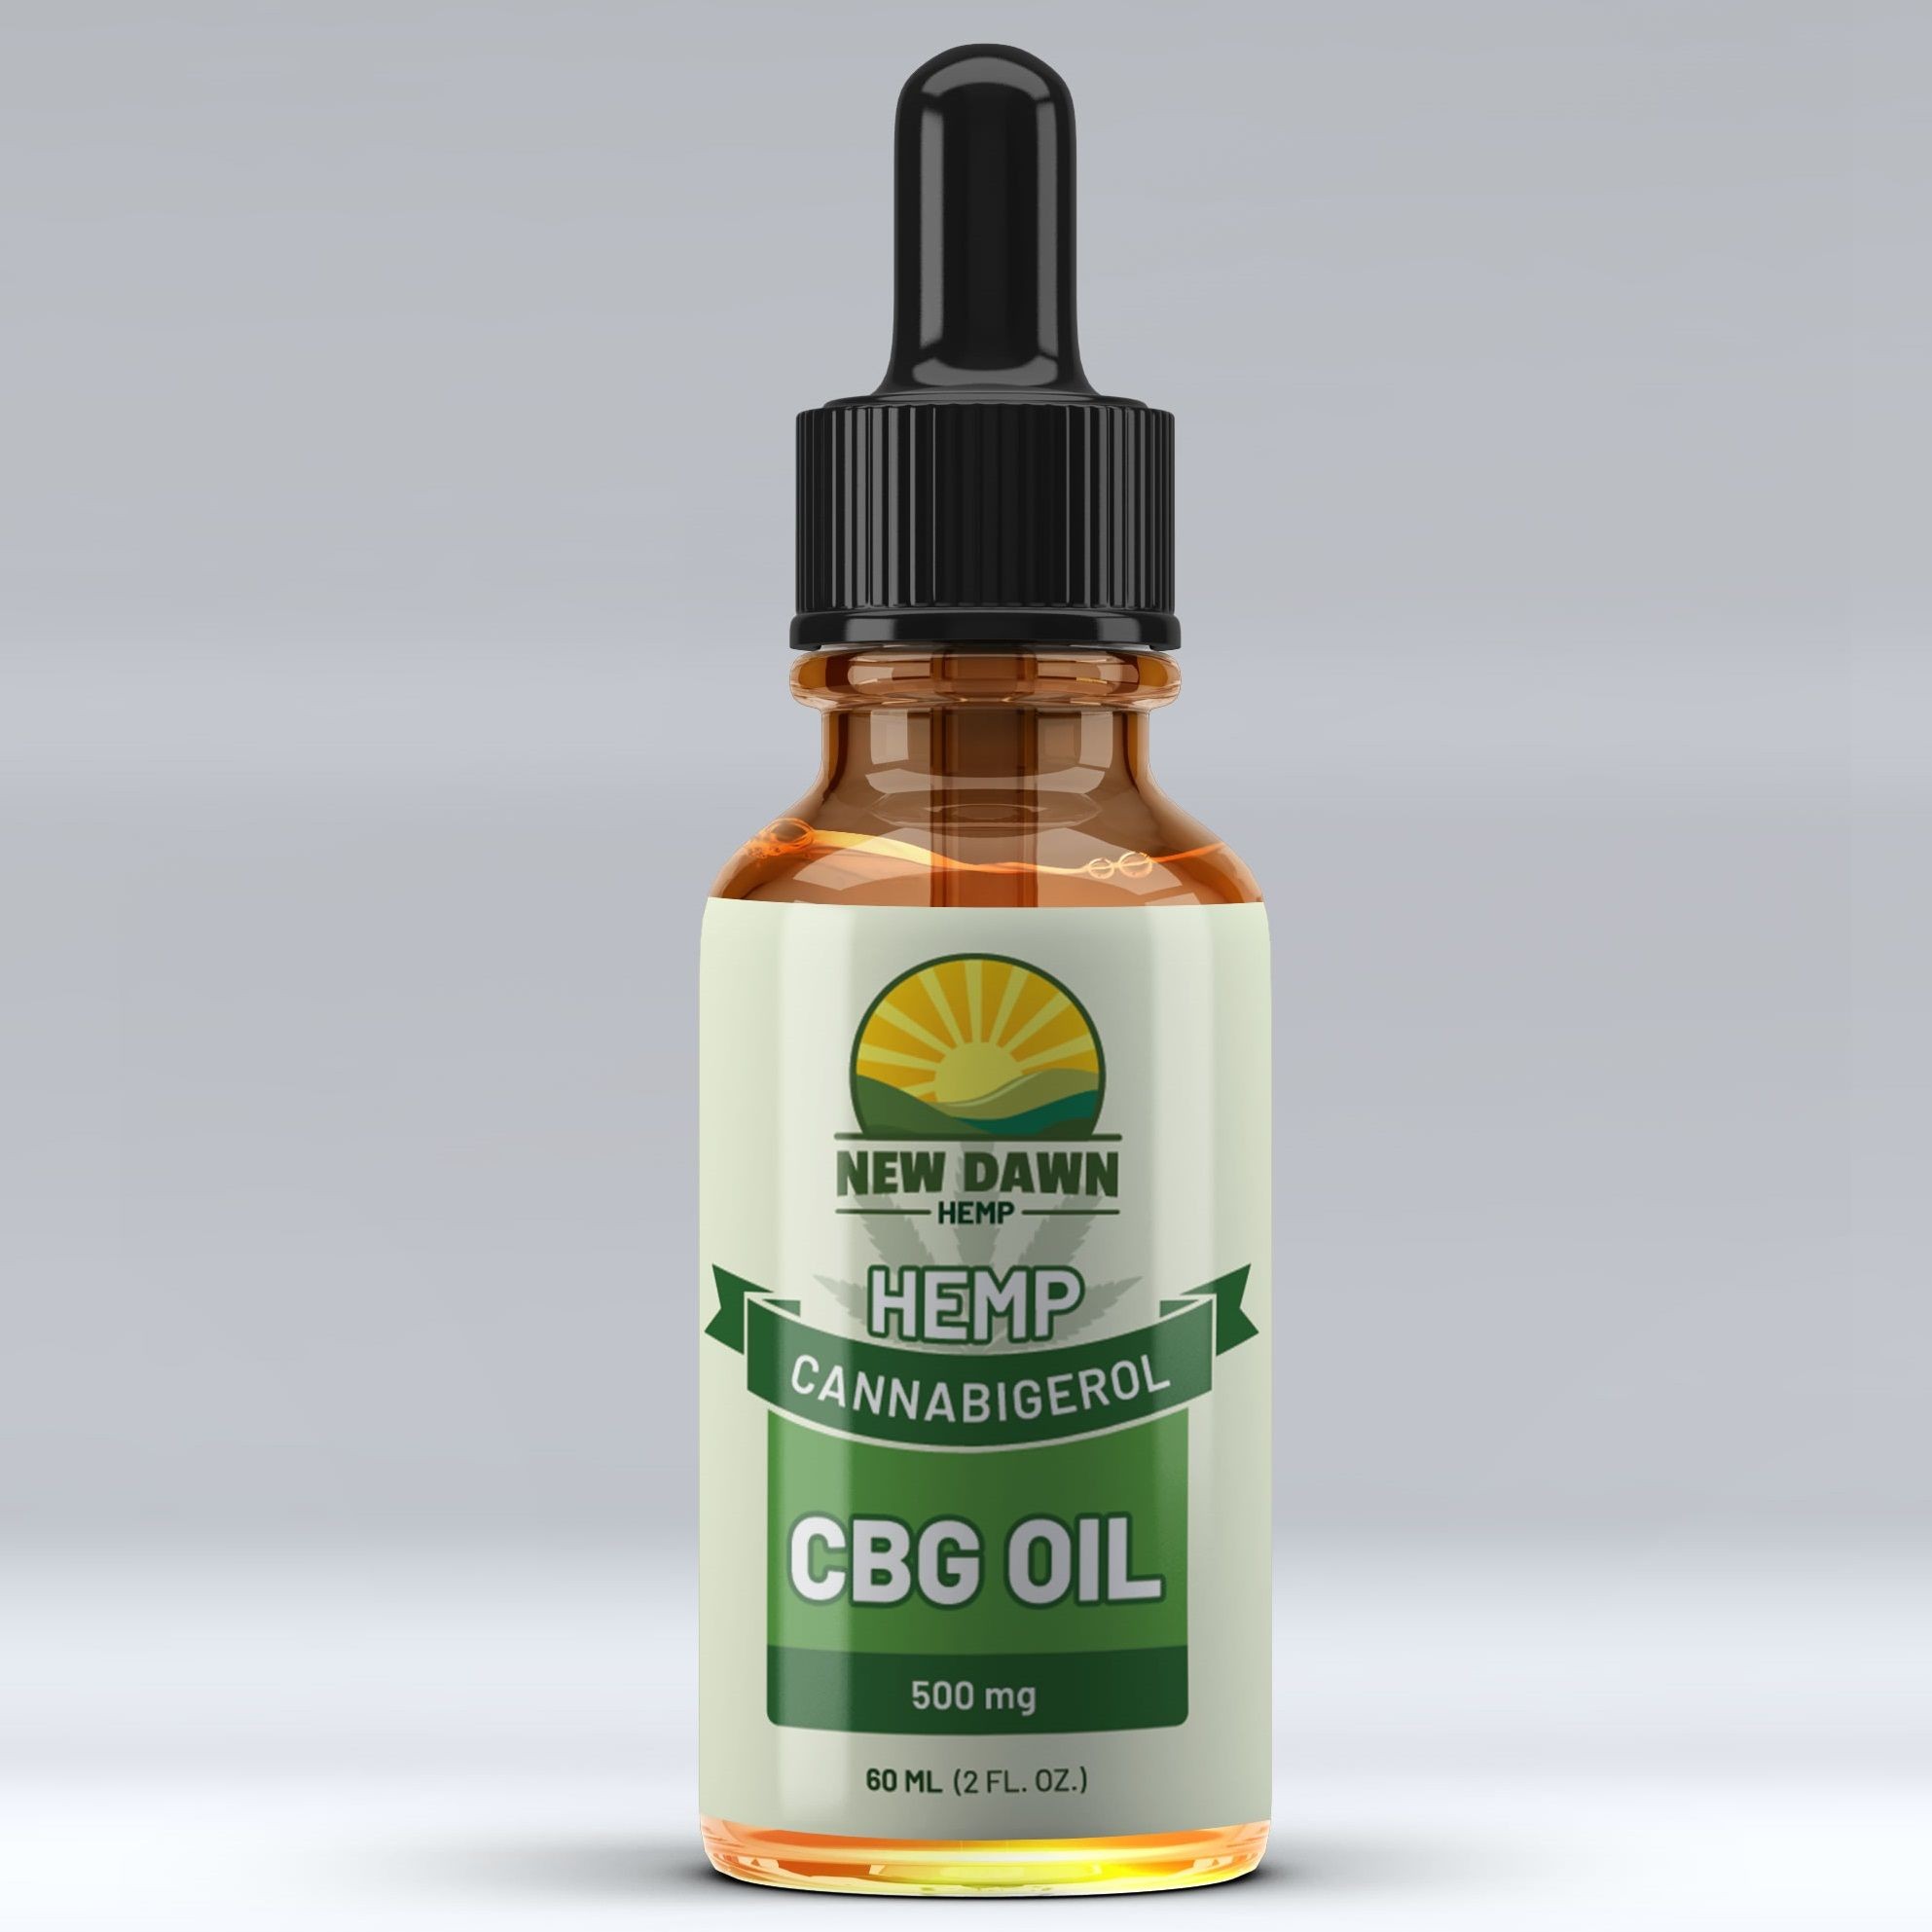 Cbg Products Kansas - Cbg|Gummies|Cbd|Effects|Thc|Cannabinoid|Hemp|Cannabinoids|Image|Products|Courtesy|Product|Way|Benefits|Dosage|Everyone|Oil|People|Spectrum|Others|Gummy|Time|Dosages|Advantages|Cannabis|Results|Treatment|Body|Stomach|Tincture|Pain|Drug|Approach|Isolate|Side|Dog|Ingredients|List|State|Cannabigerol|Cbg Gummies|Psychoactive Effects|Full Spectrum Gummies|Image Courtesy|Full-Spectrum Cbd Products|Different Dosages|Right Dosage|Empty Stomach|Cbd Gummies|Cbd Isolate|Side Effects|Different Effects|Dog Cbg Gummies|Drug Test|Full-Spectrum Cbd Product|Few Things|Chronic Pain|Full-Spectrum Cbd|Psychotropic Effects|Final Thoughts|Right Dosage Everyone|Final Tips|Same Results|Cbg Ratio|Appetite Loss|Powerful Hunger Stimulant|Whereas Cbd|Thc Ratio Gummies|Dangerous Consequence|Numerous Diseases